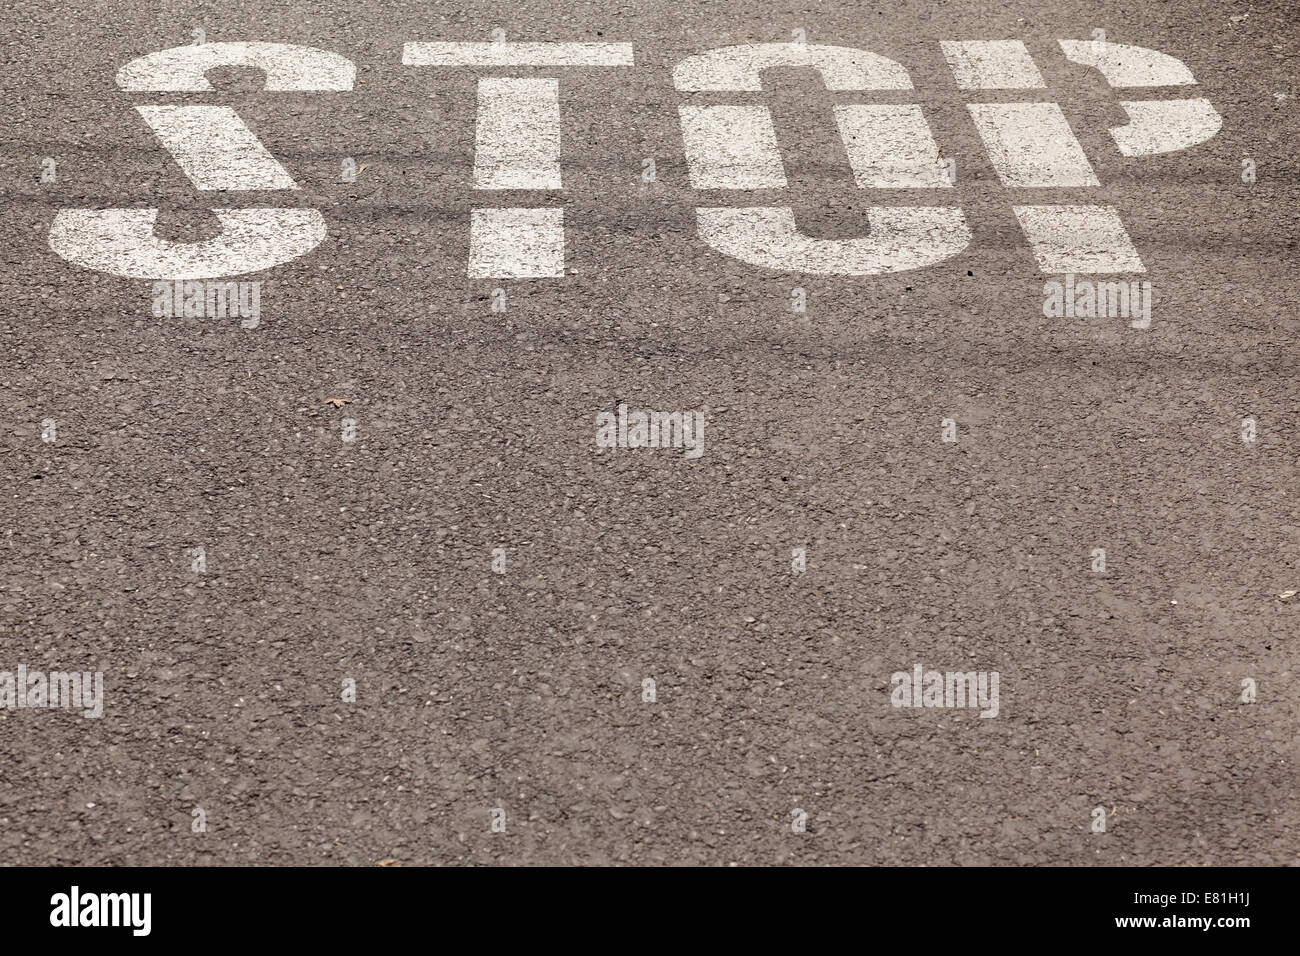 stop sign painted on asphalt Stock Photo